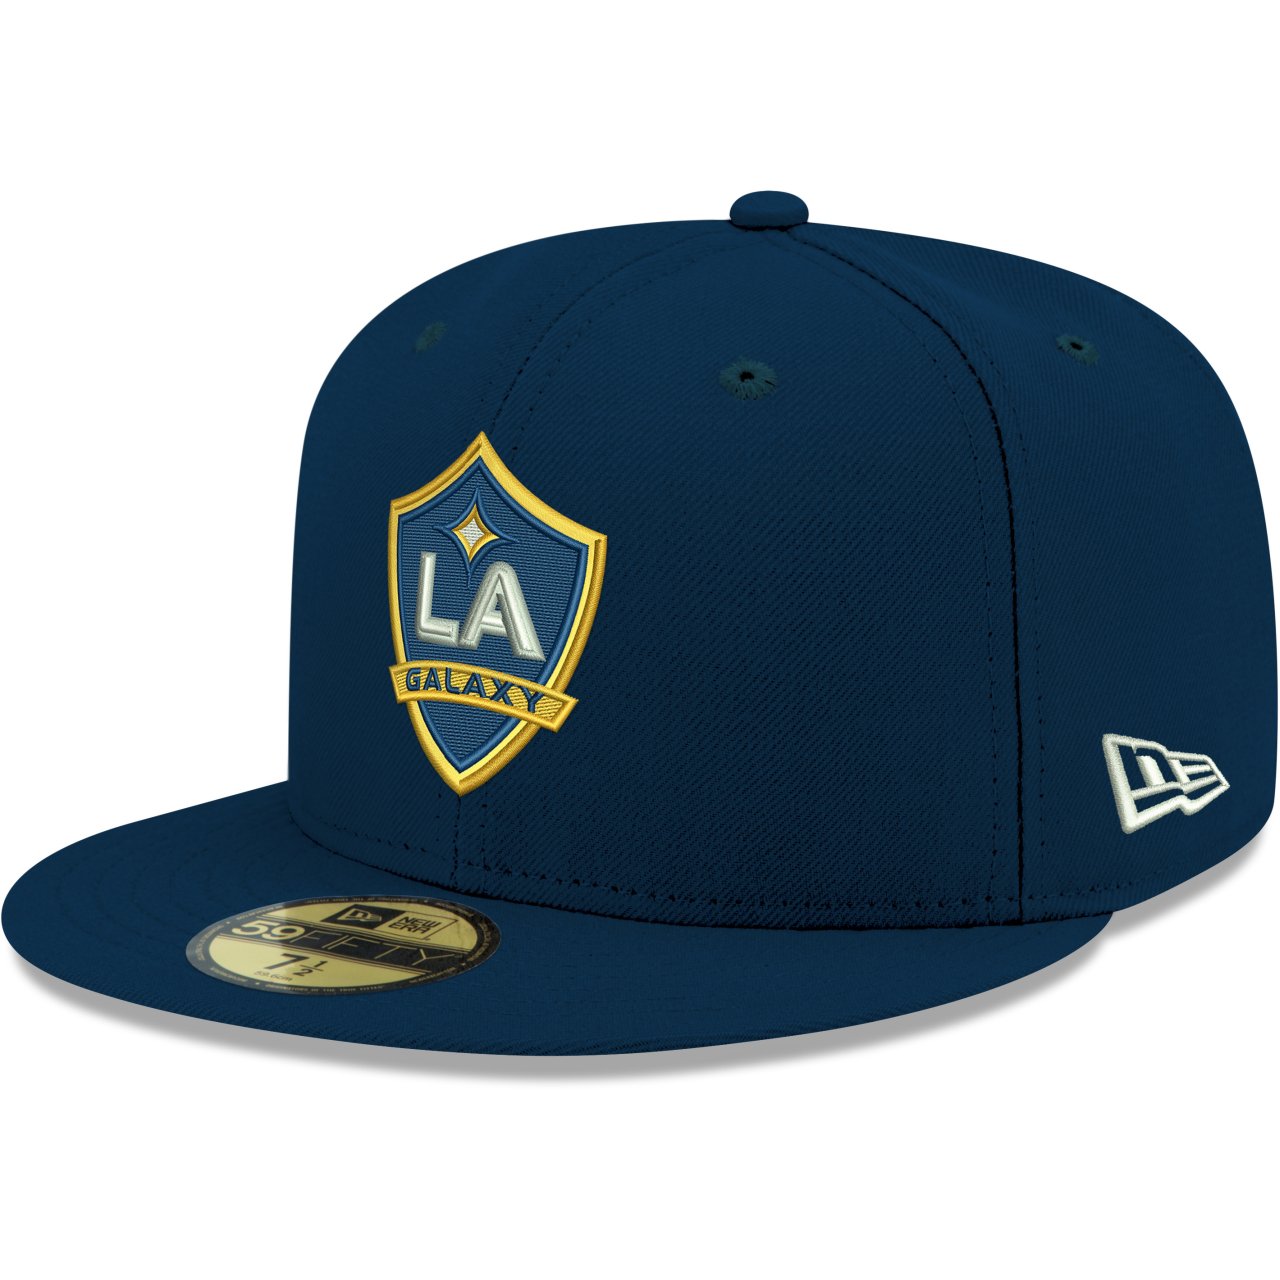 New Era 59Fifty Fitted Cap MLS Los Angeles Galaxy Navy 